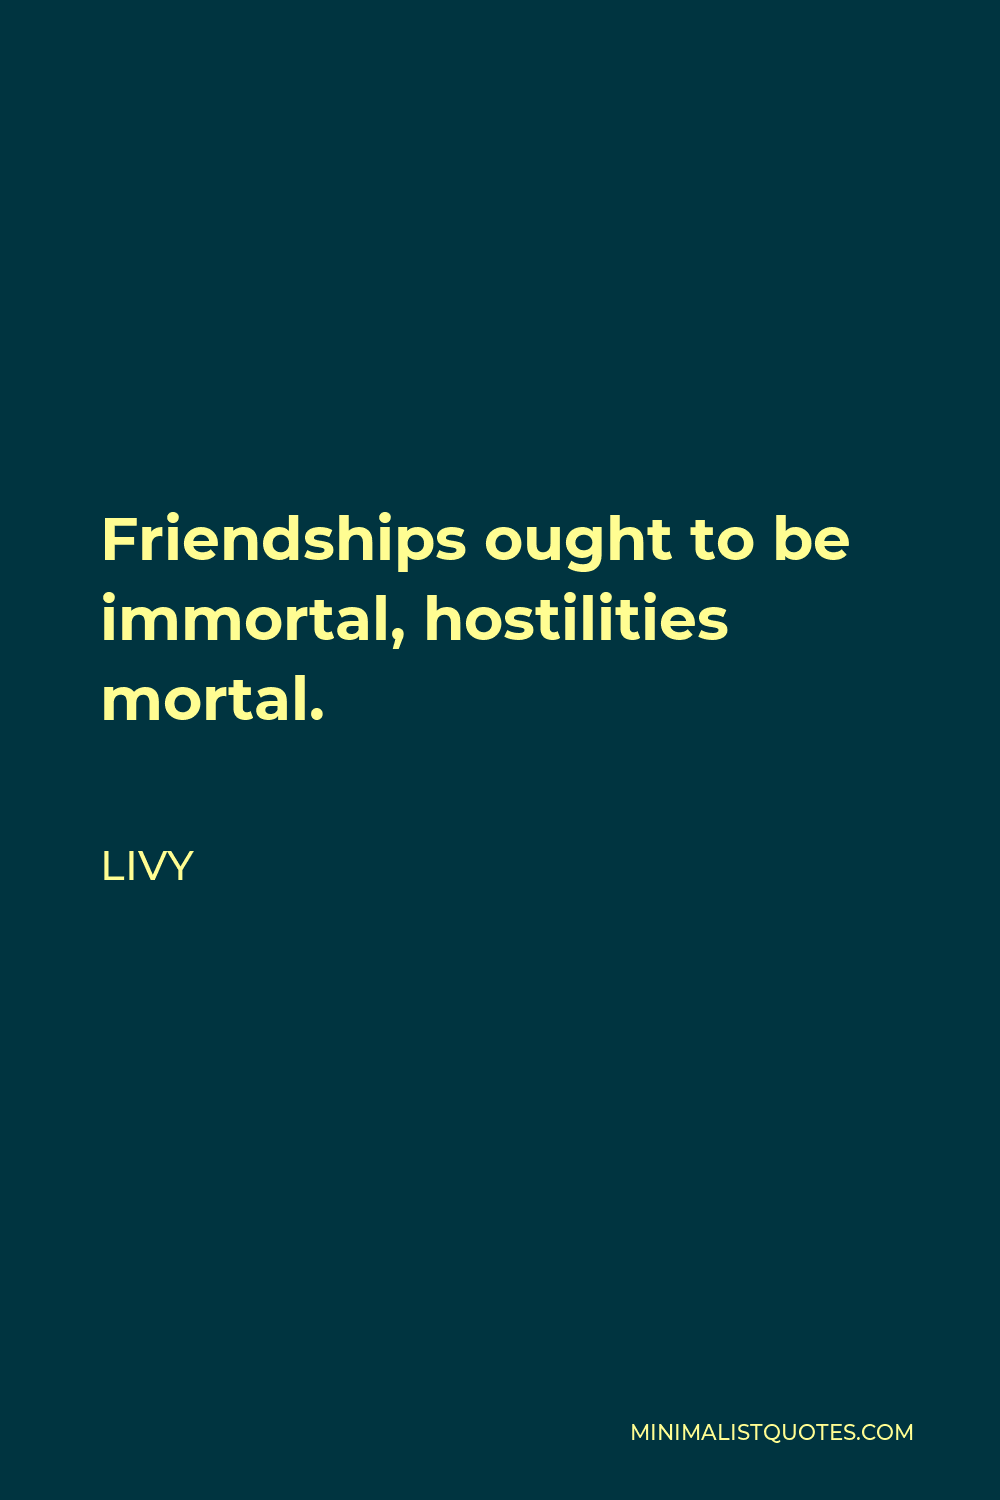 Livy Quote - Friendships ought to be immortal, hostilities mortal.